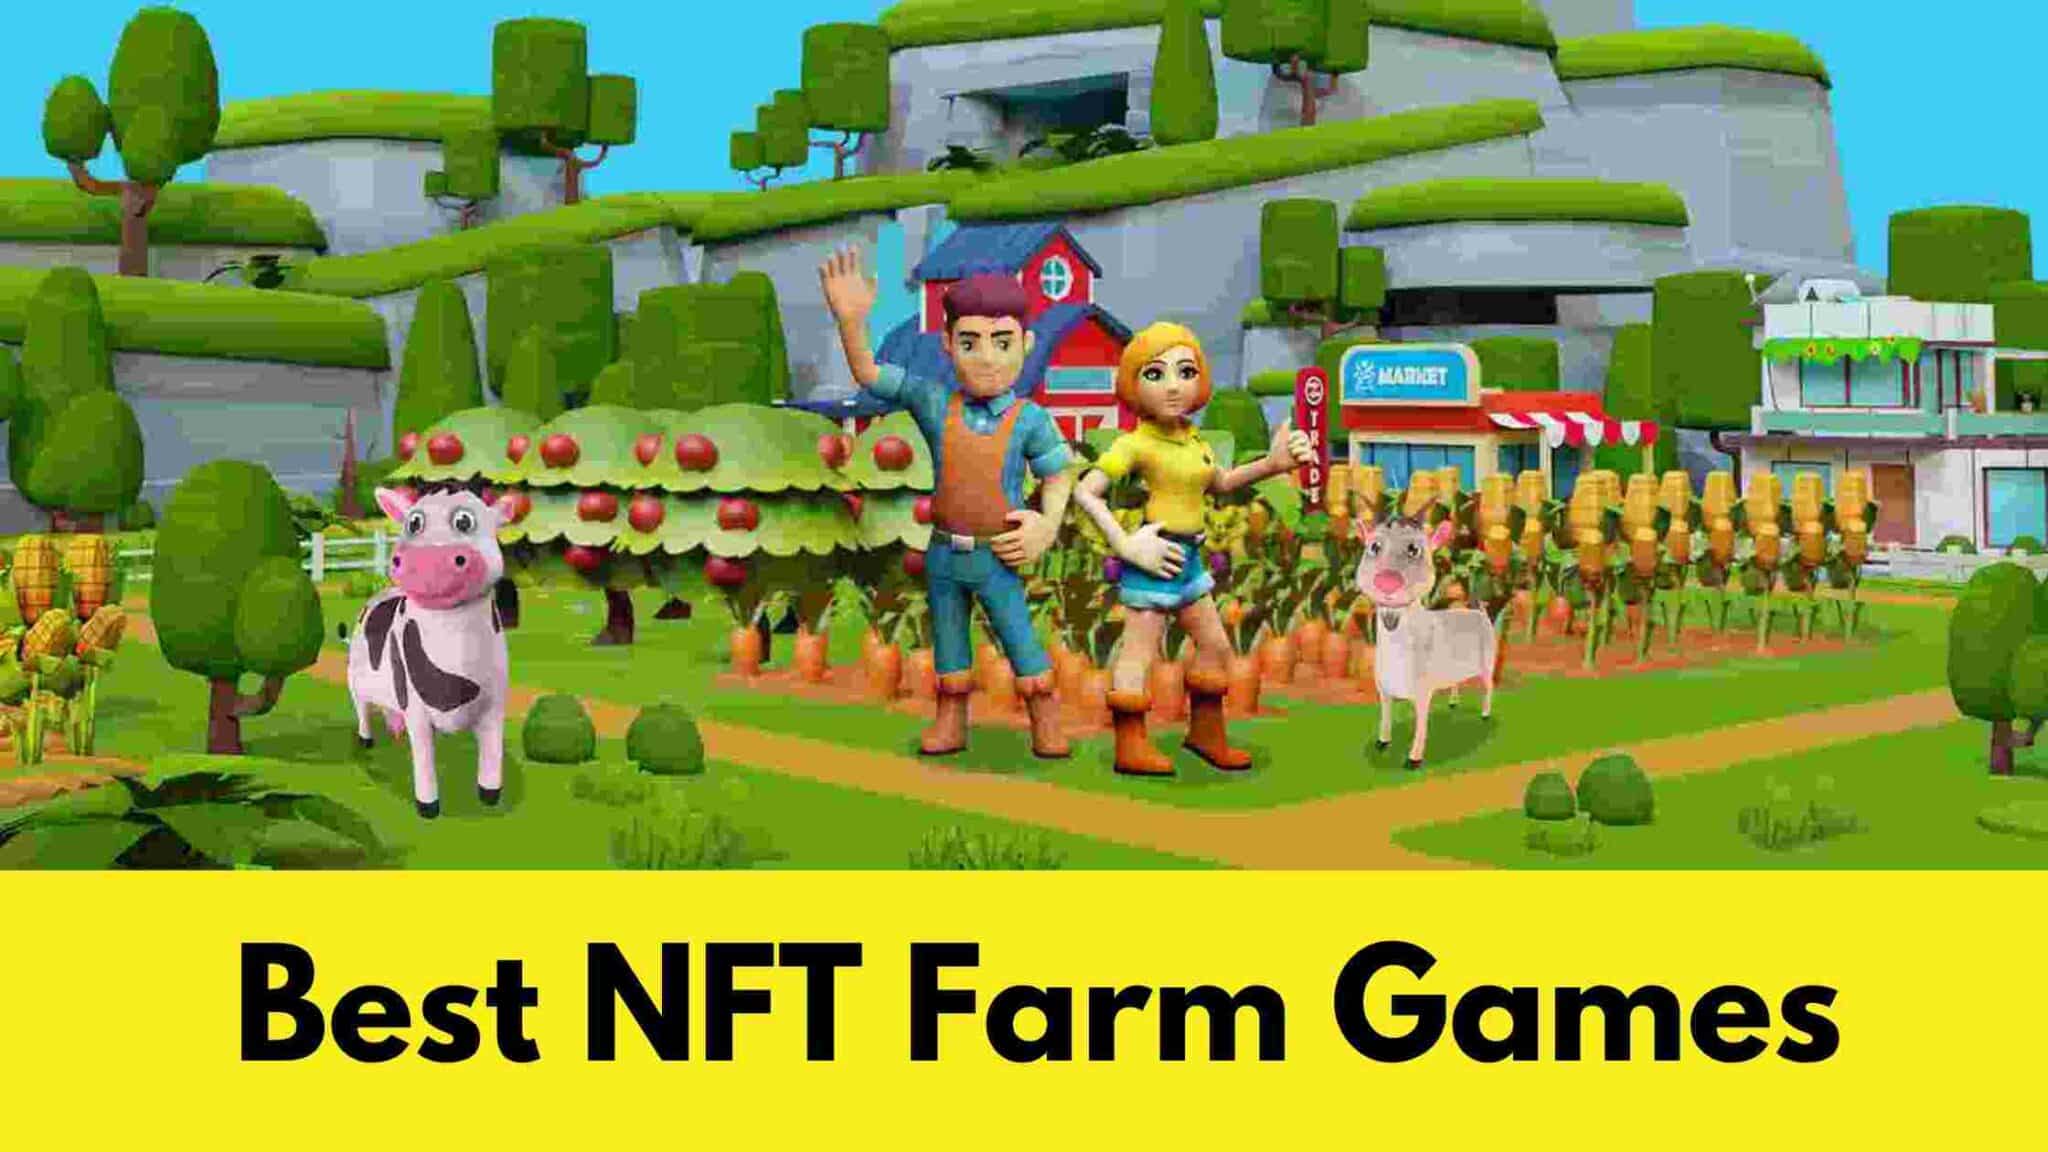 5 Best NFT Farm Games for Android and iPhone 2022